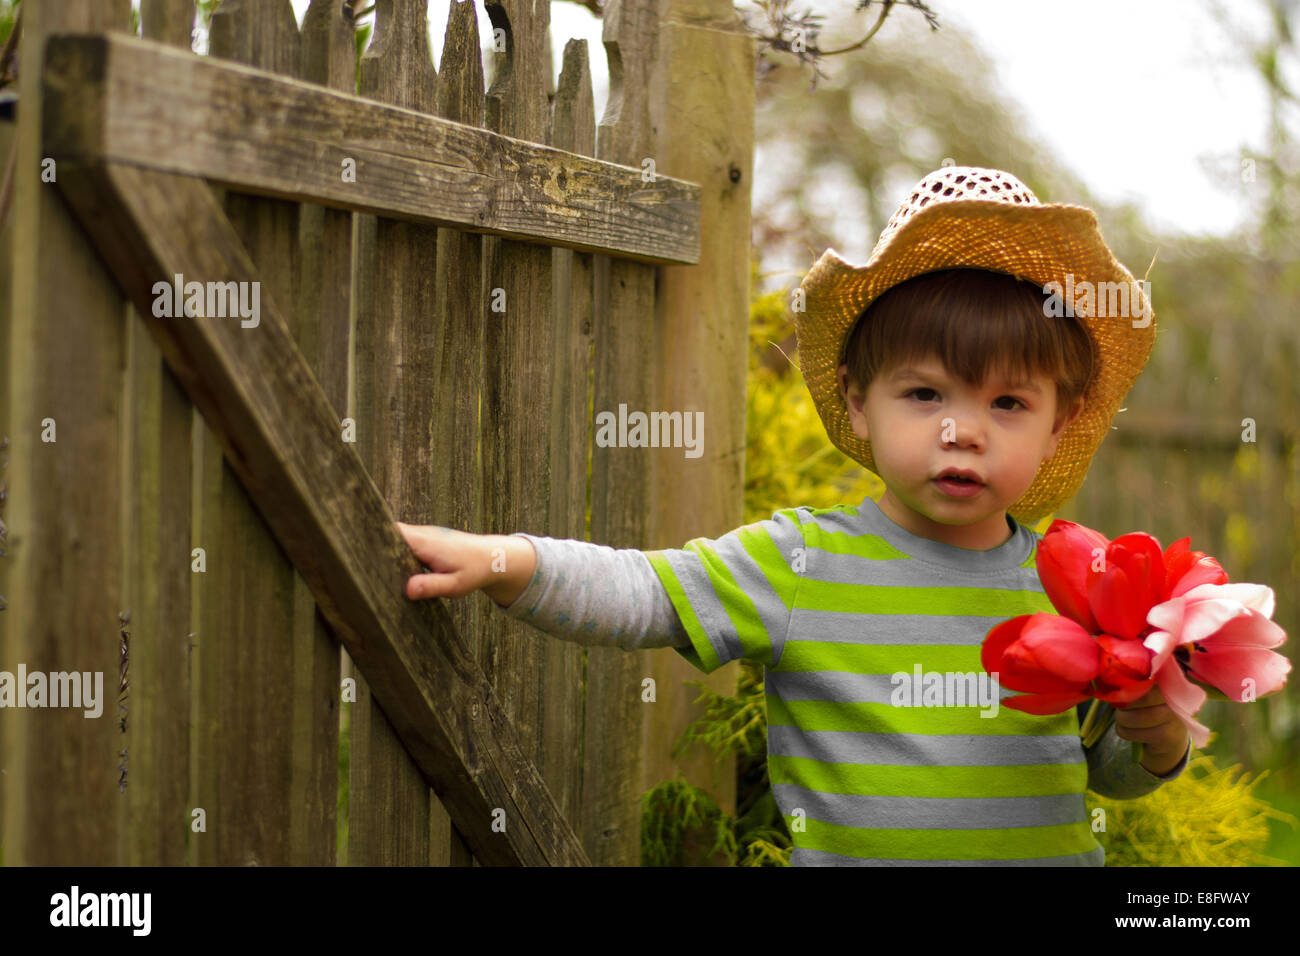 Portrait of a boy in a straw hat holding a bunch of flowers Stock Photo